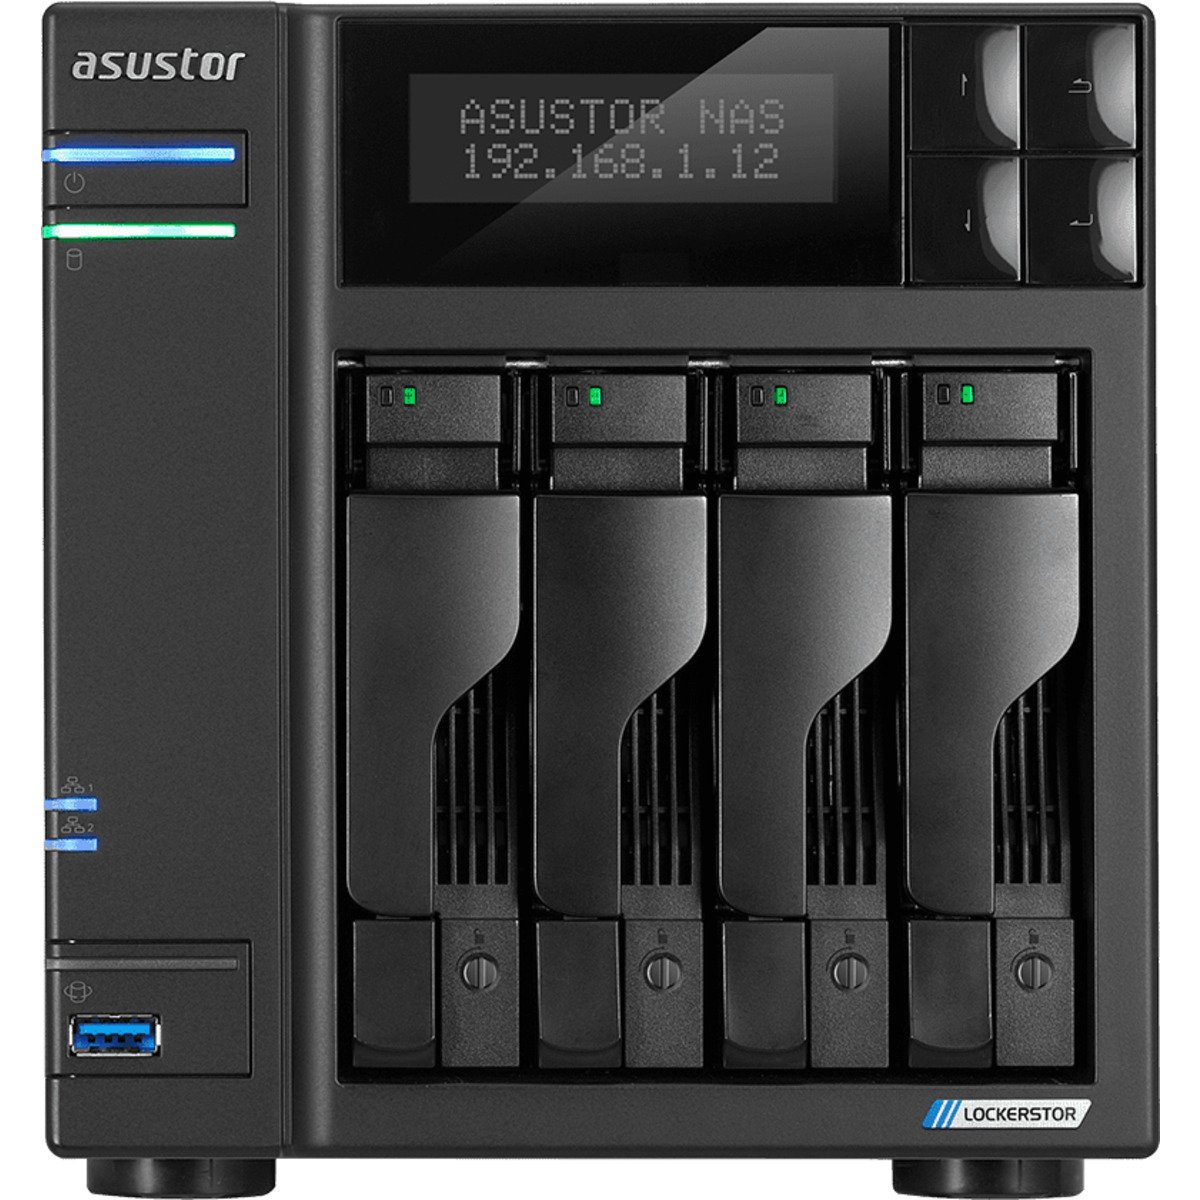 ASUSTOR AS6604T Lockerstor 4 32tb 4-Bay Desktop Multimedia / Power User / Business NAS - Network Attached Storage Device 4x8tb Western Digital Red Pro WD8003FFBX 3.5 7200rpm SATA 6Gb/s HDD NAS Class Drives Installed - Burn-In Tested - FREE RAM UPGRADE AS6604T Lockerstor 4